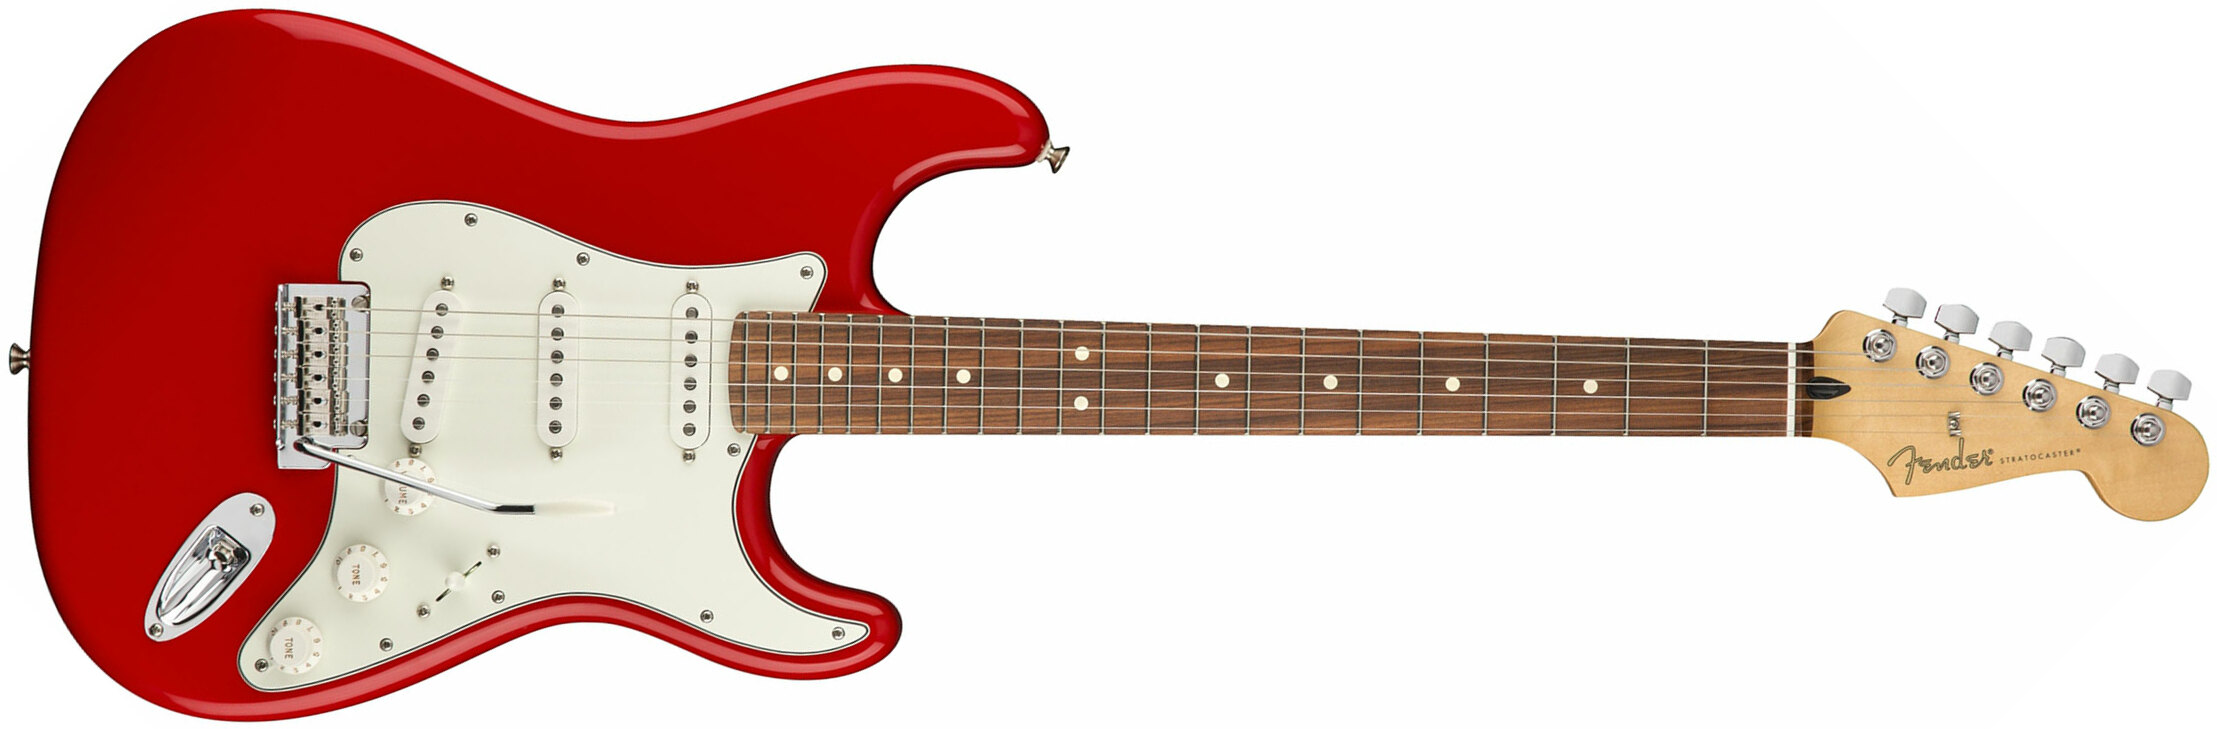 Fender Strat Player Mex Sss Pf - Sonic Red - E-Gitarre in Str-Form - Main picture